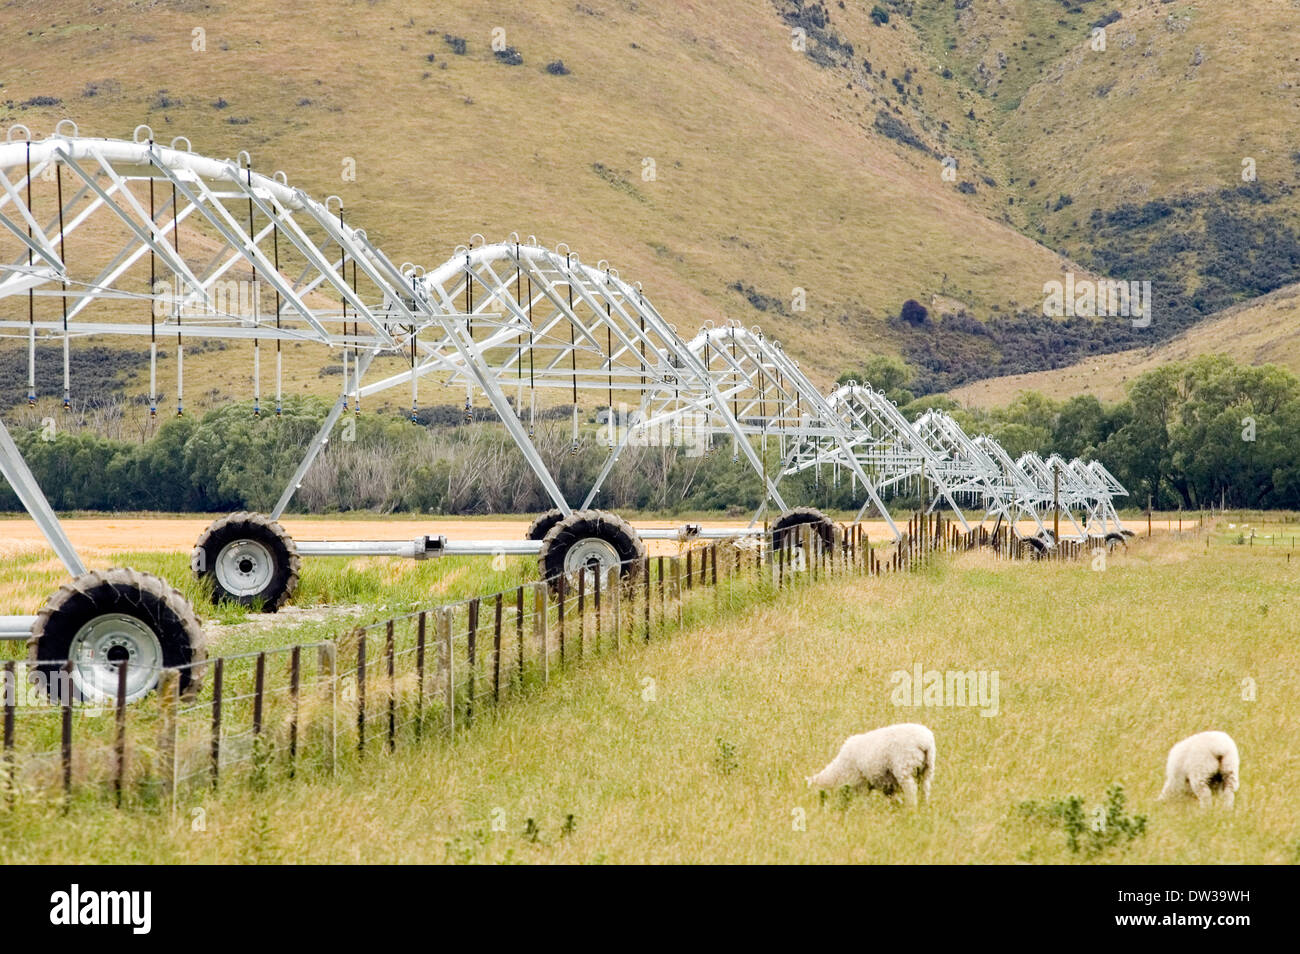 Irrigation wheeled system watering fields or crops in New Zealand Stock Photo